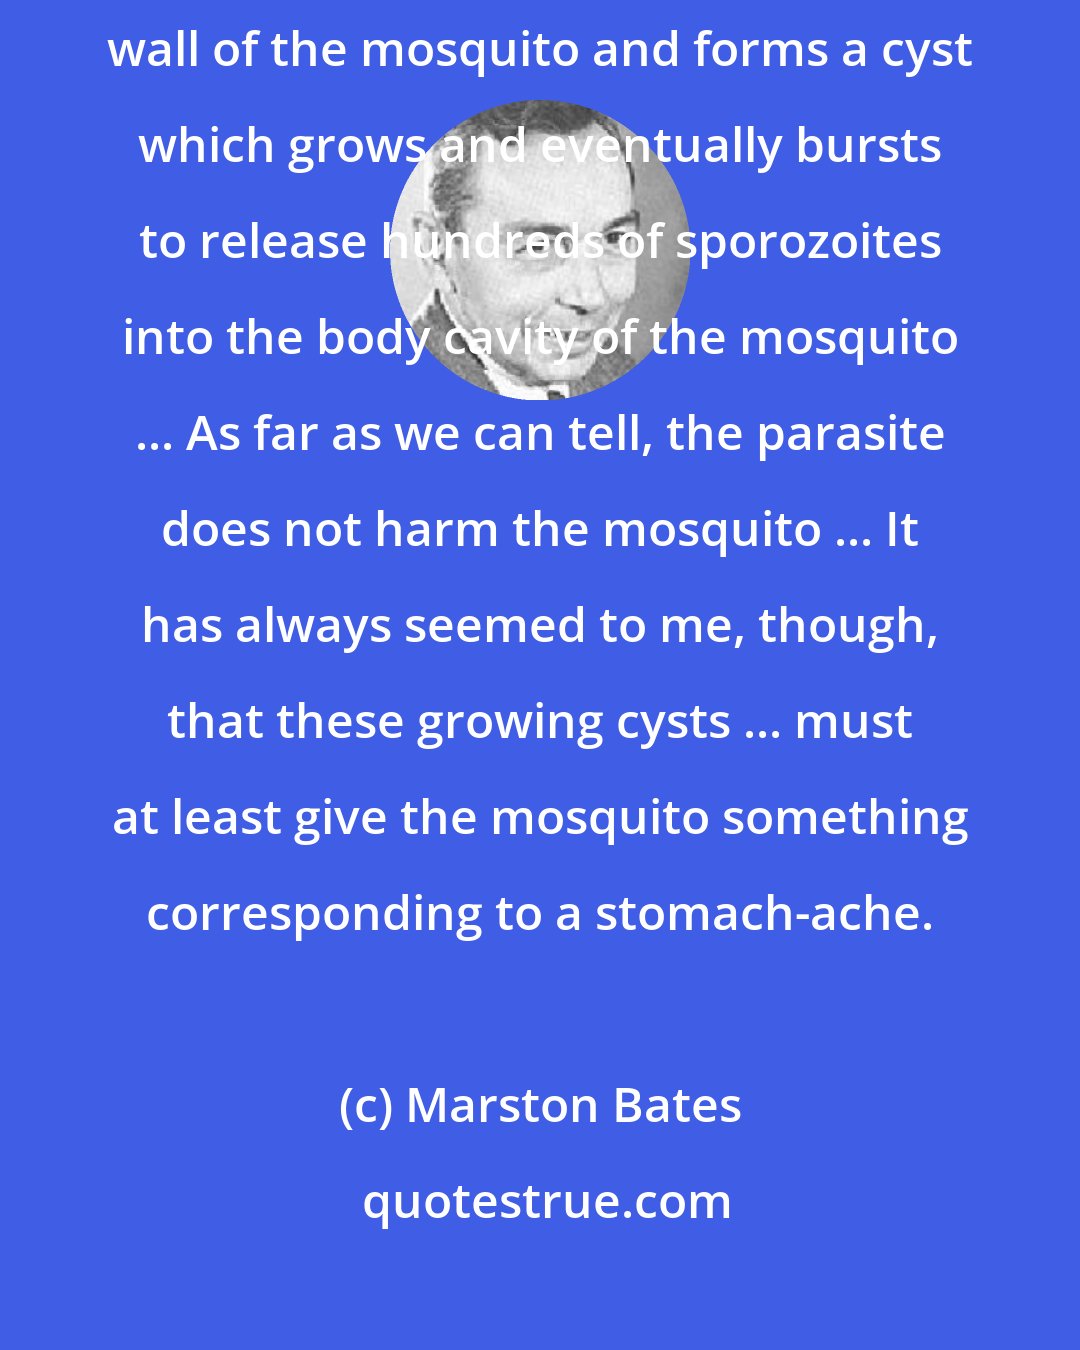 Marston Bates: The parasite that causes malaria edges through the cells of the stomach wall of the mosquito and forms a cyst which grows and eventually bursts to release hundreds of sporozoites into the body cavity of the mosquito ... As far as we can tell, the parasite does not harm the mosquito ... It has always seemed to me, though, that these growing cysts ... must at least give the mosquito something corresponding to a stomach-ache.